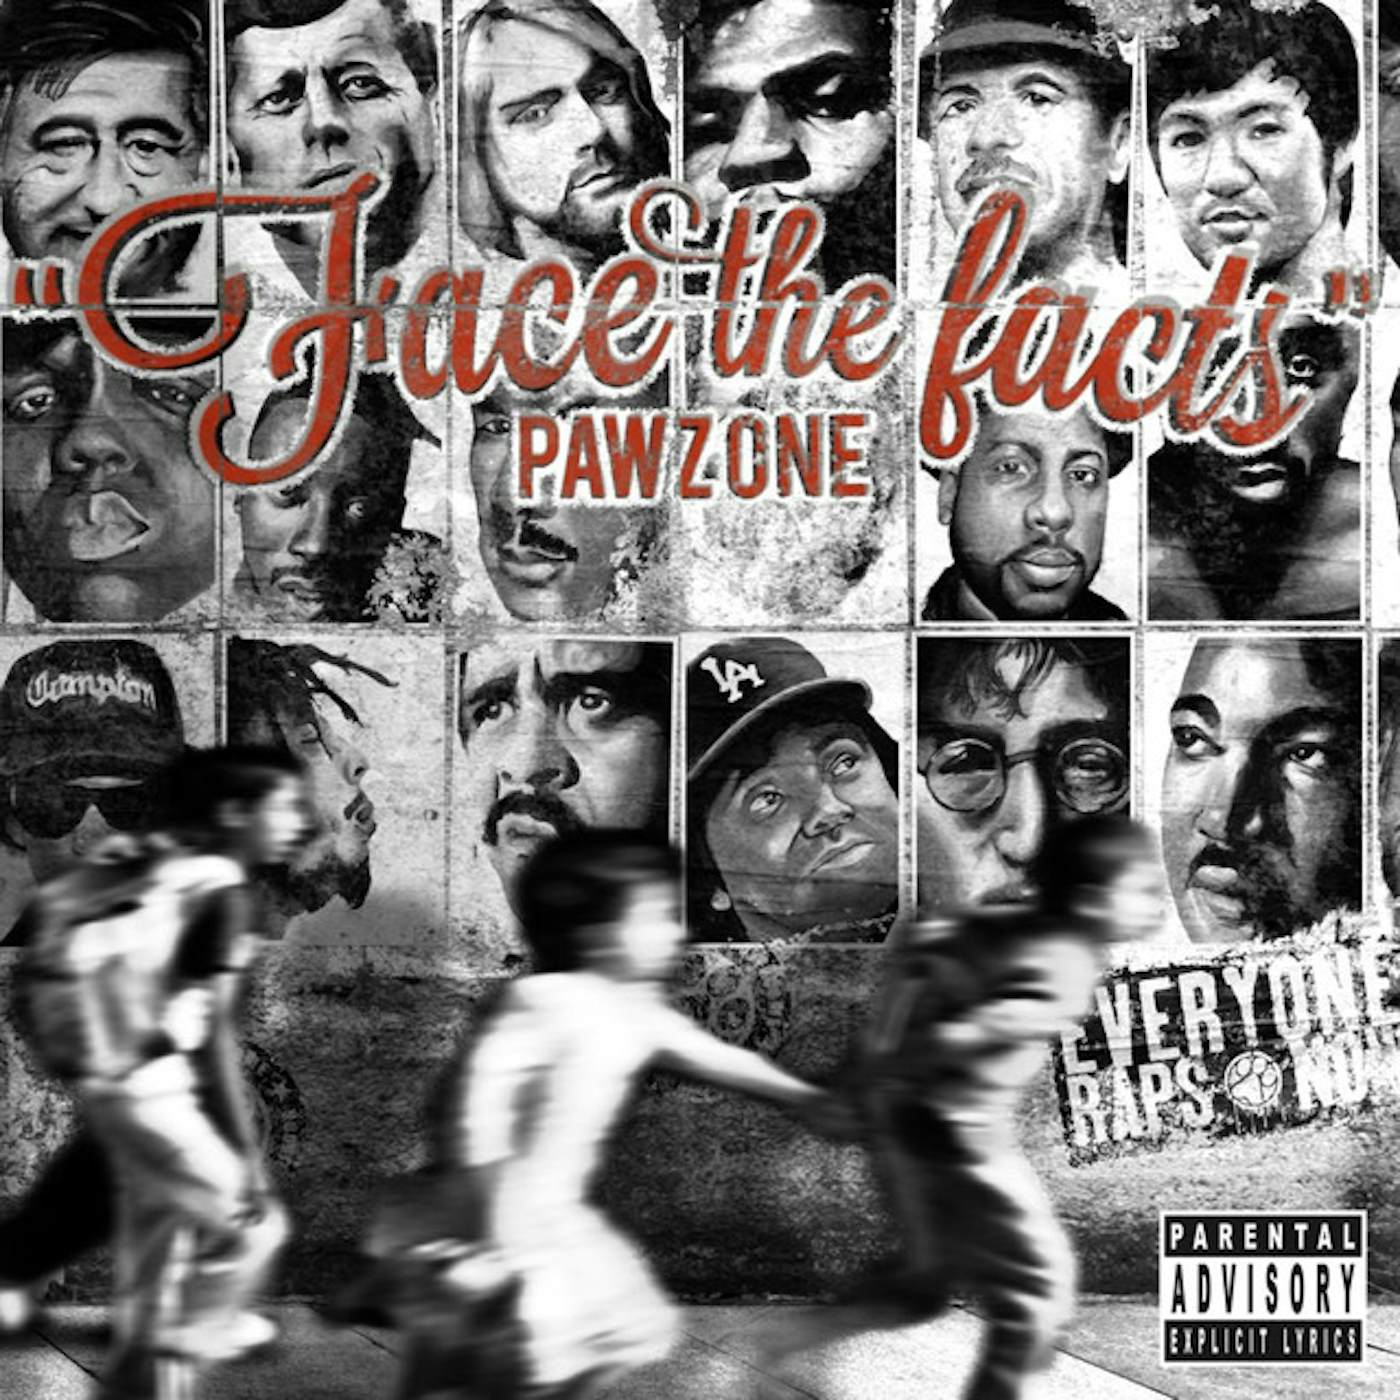 Pawz One Face The Facts Vinyl Record